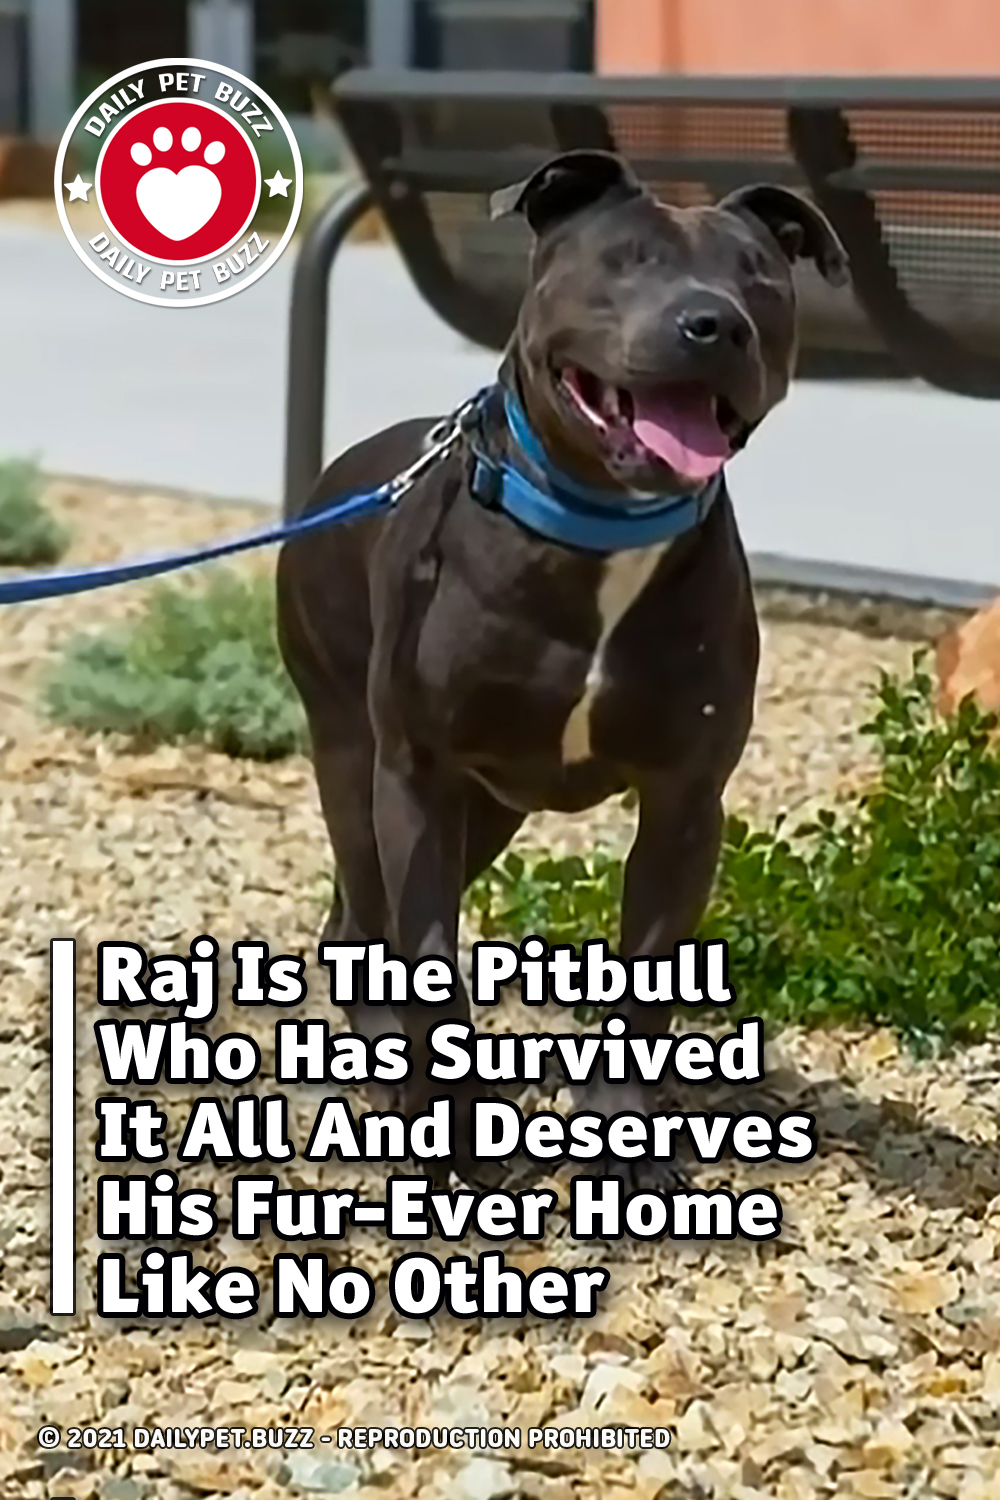 Raj Is The Pitbull Who Has Survived It All And Deserves His Fur-Ever Home Like No Other